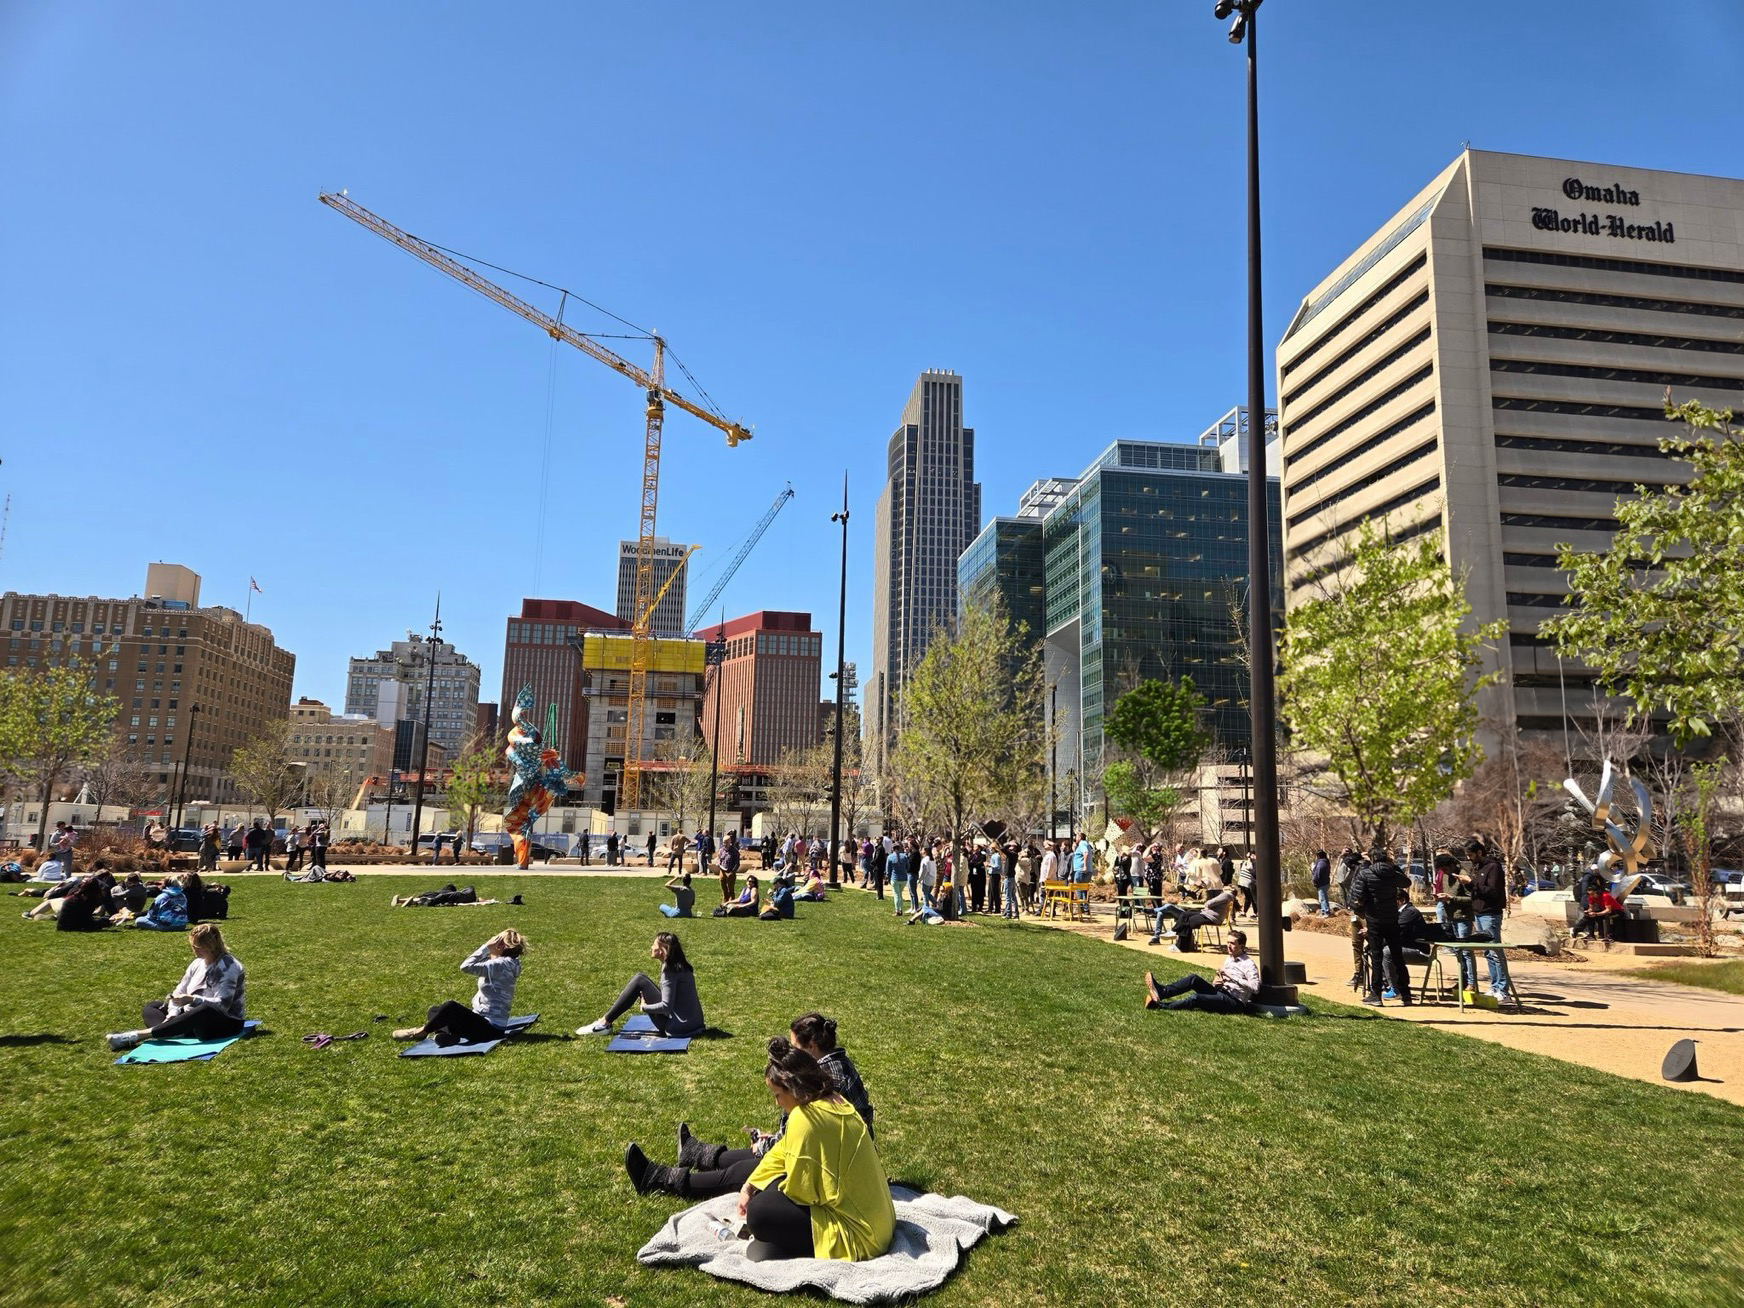 An image of a downtown park with trees in the spring. People are gathered and sitting on blankets.